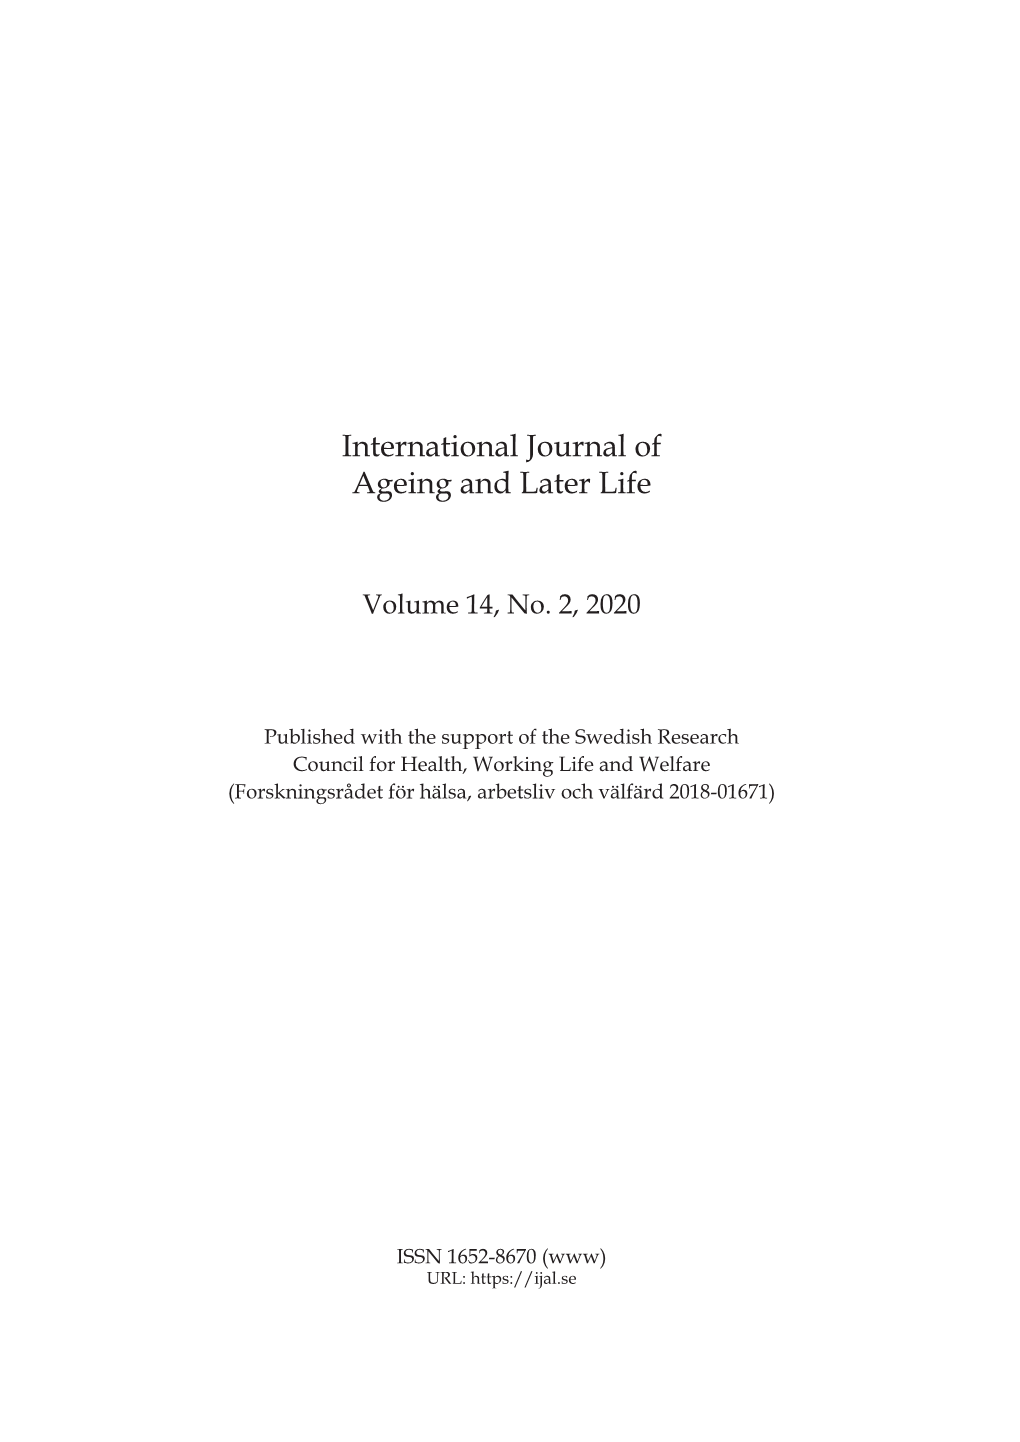 International Journal of Ageing and Later Life